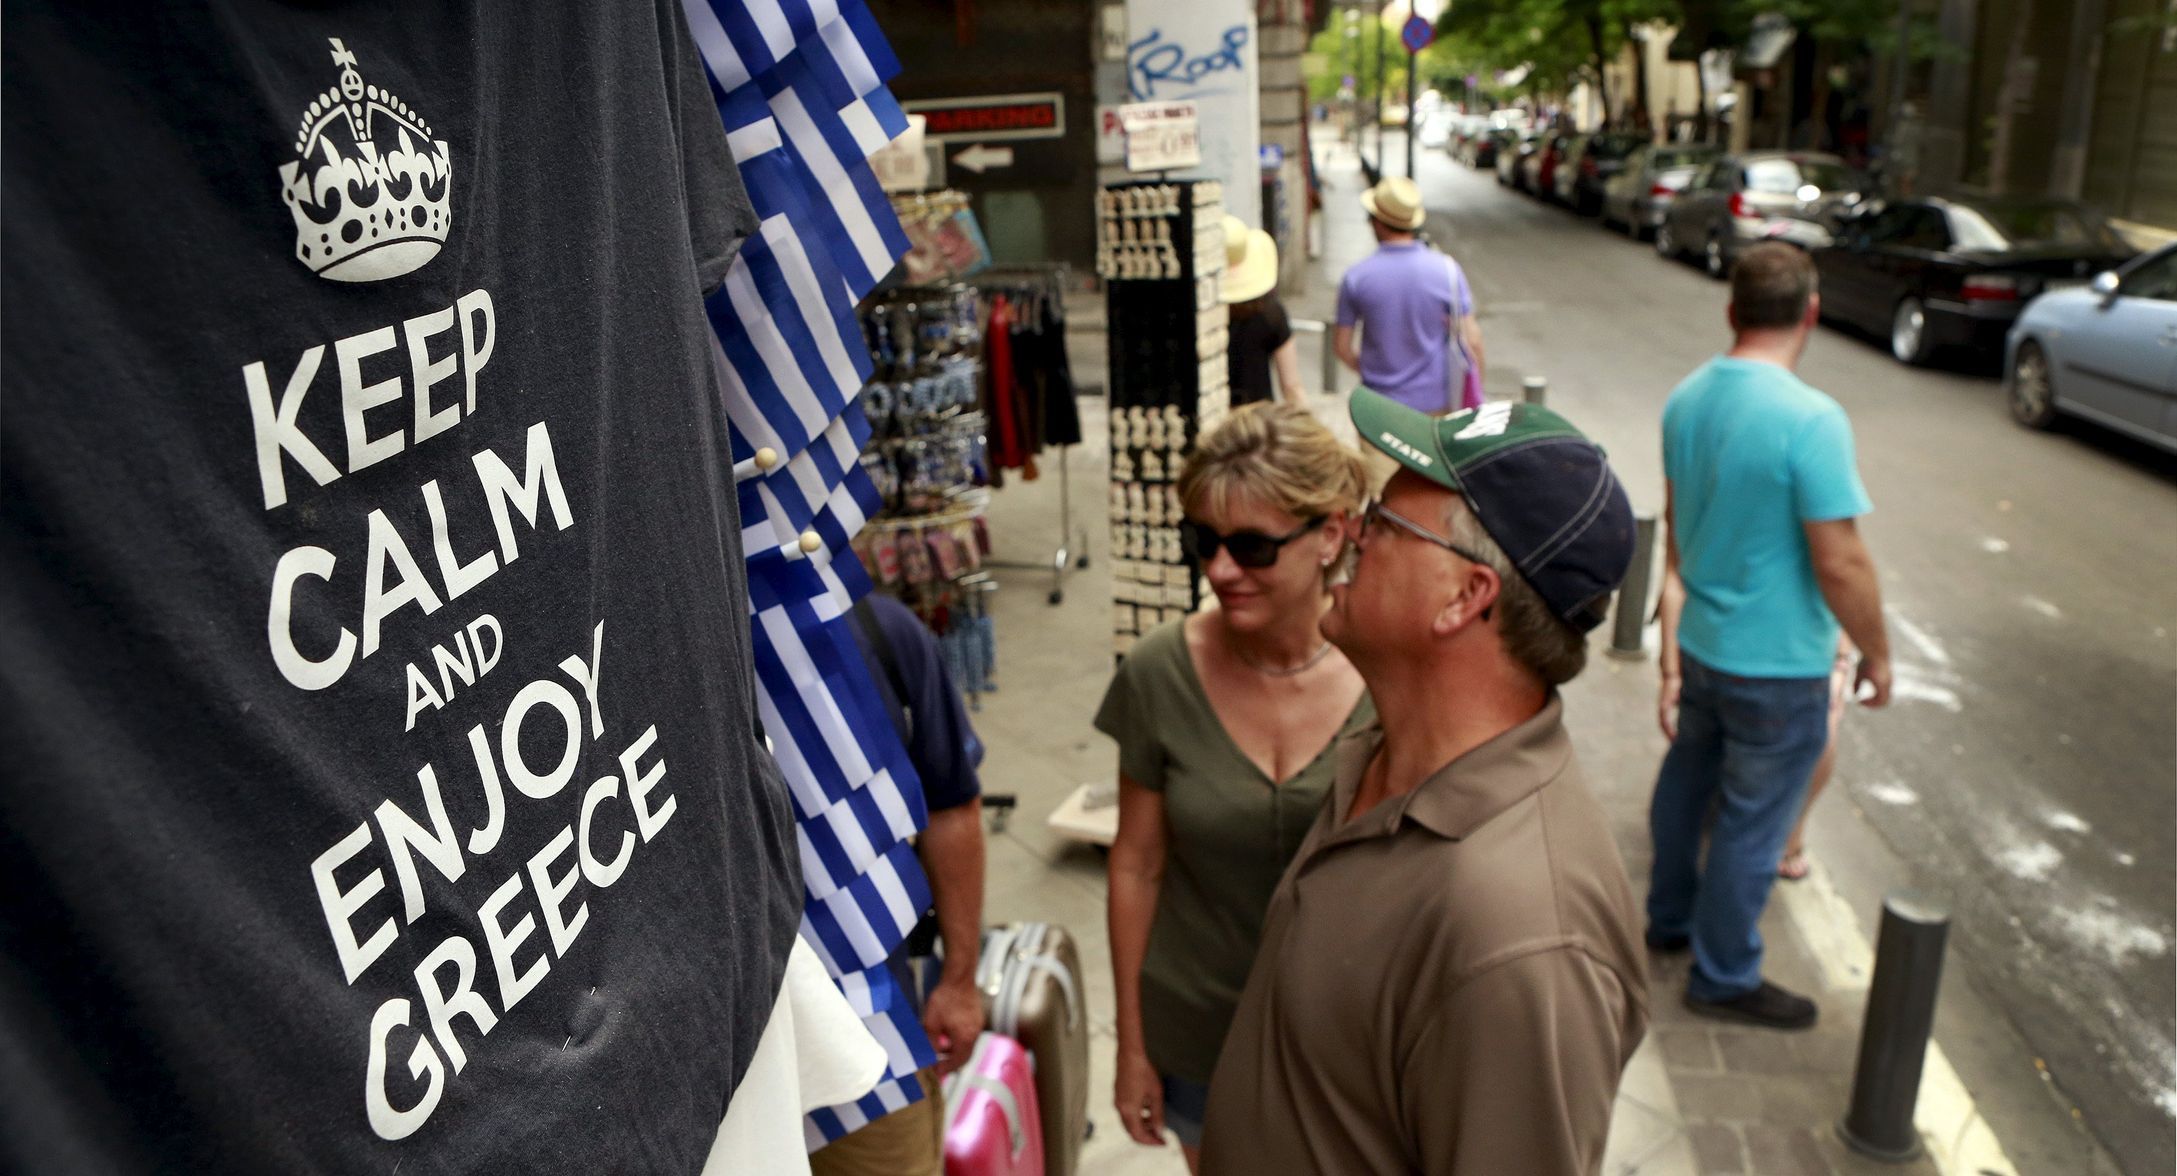 Řecko turisté T-shirts on display in a shop in Athens, Greece